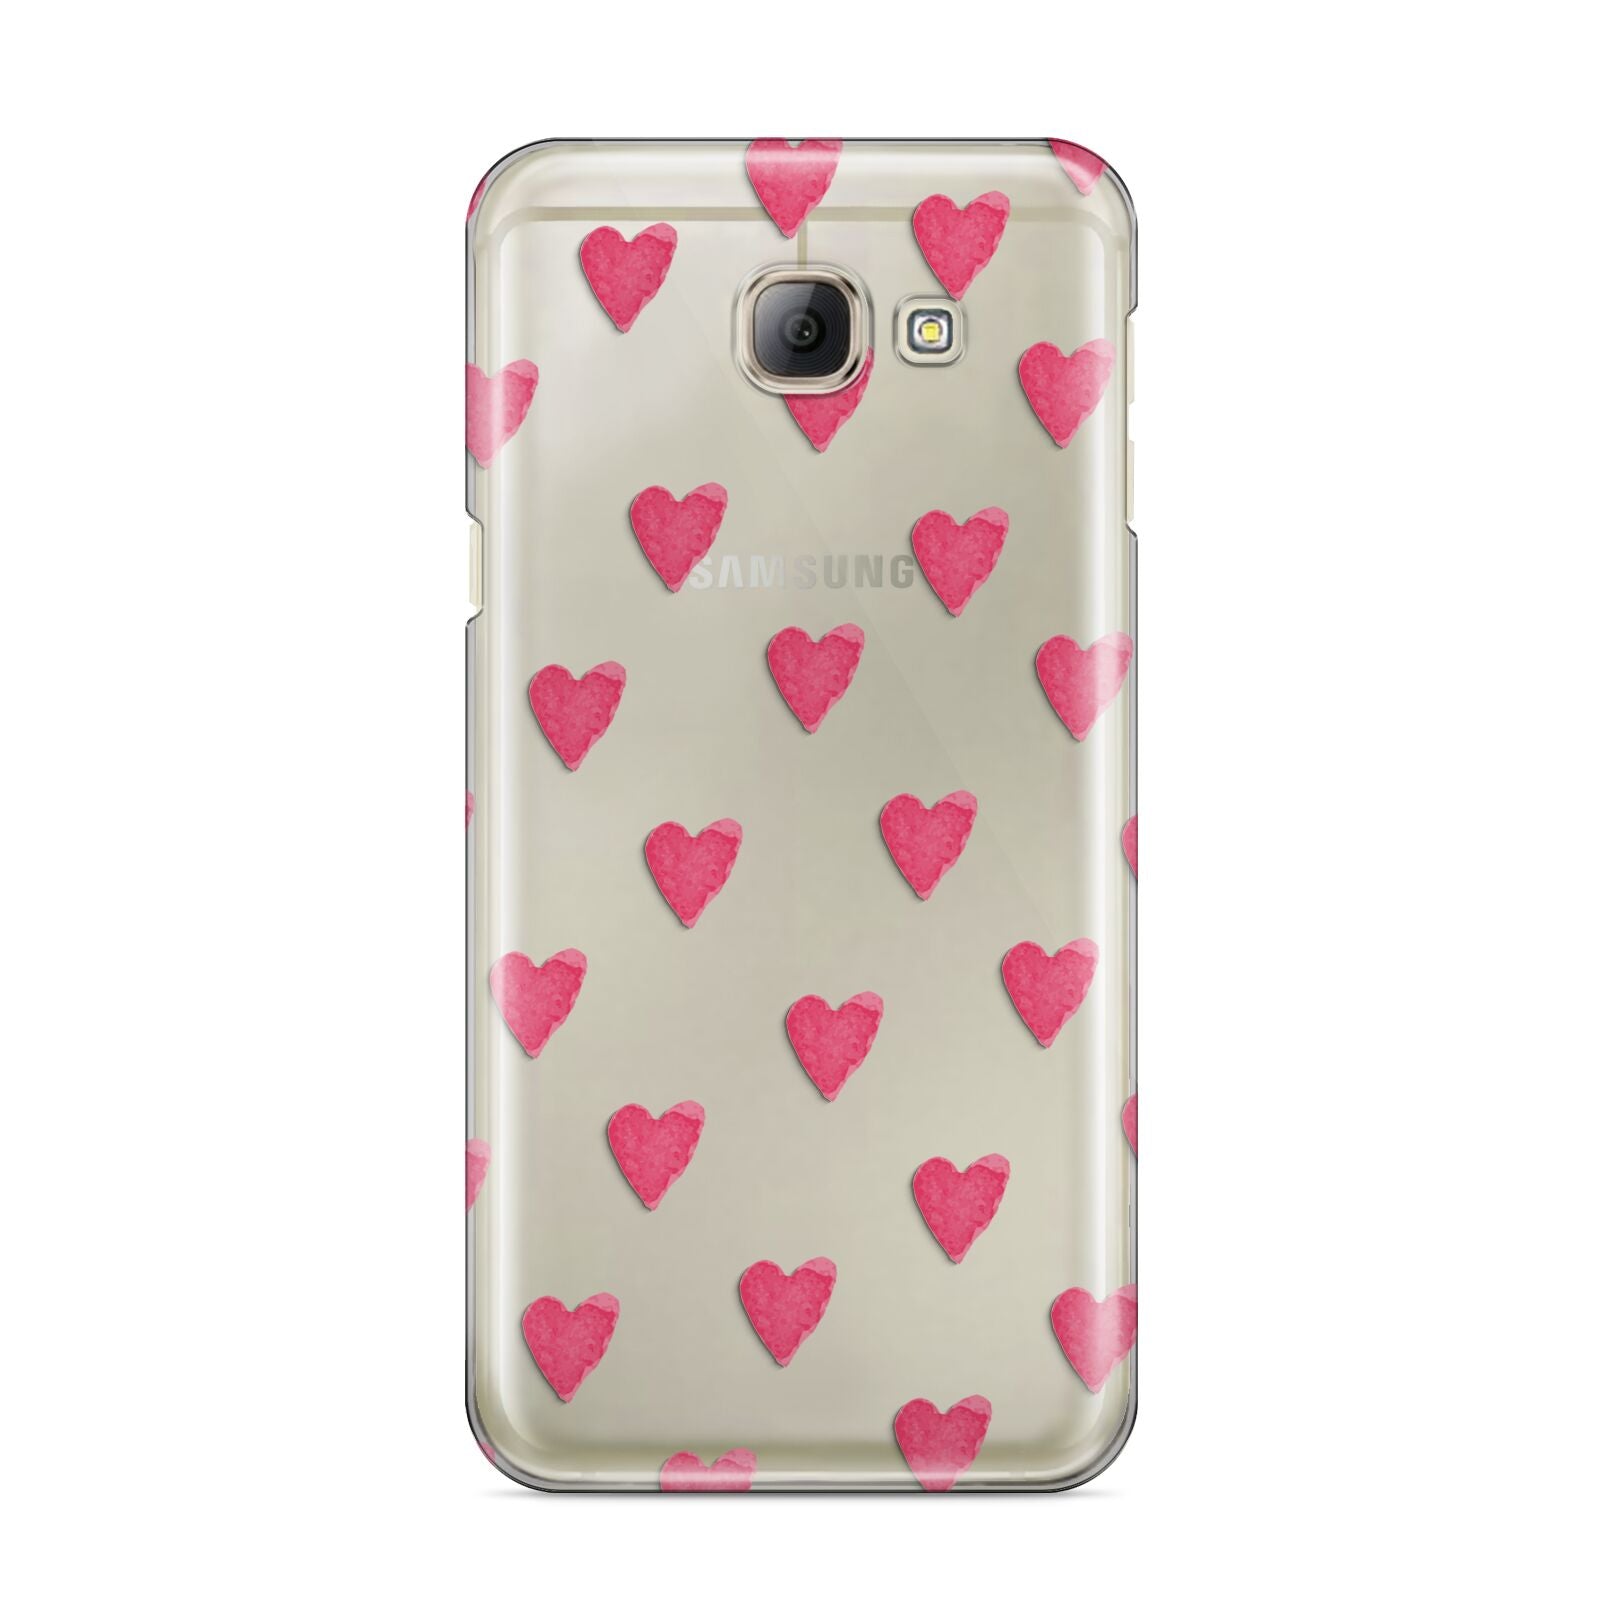 Heart Patterned Samsung Galaxy A8 2016 Case